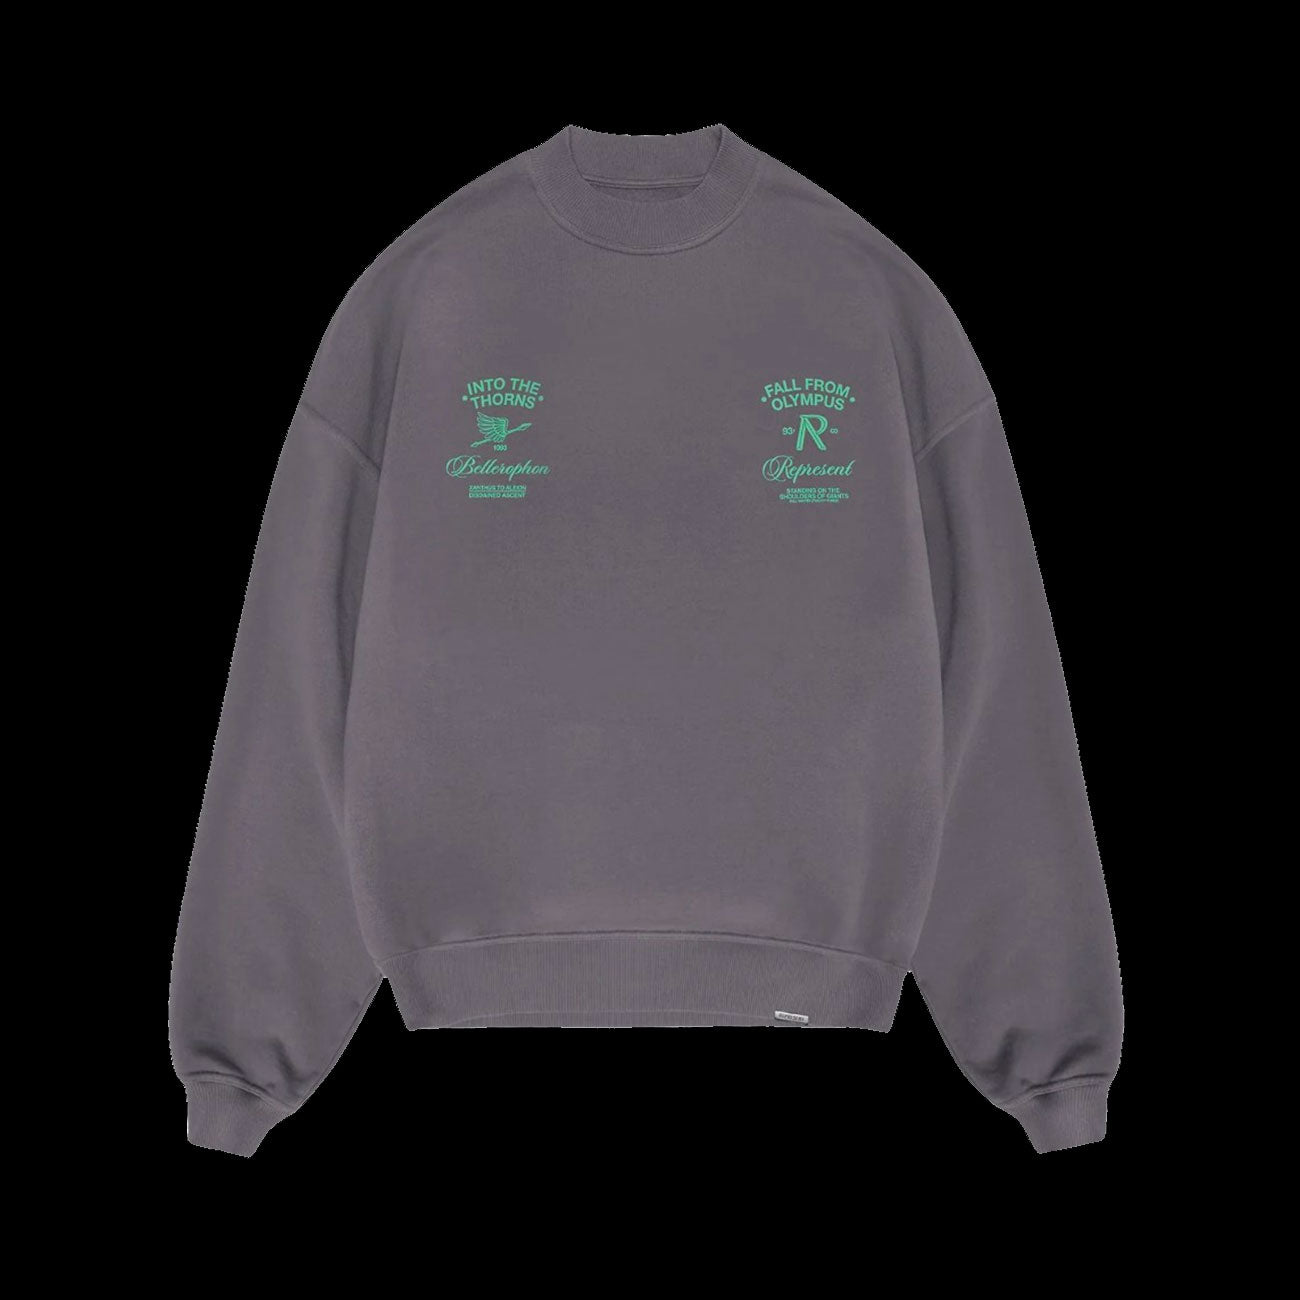 Represent Fall From Olympus Sweater (Storm)